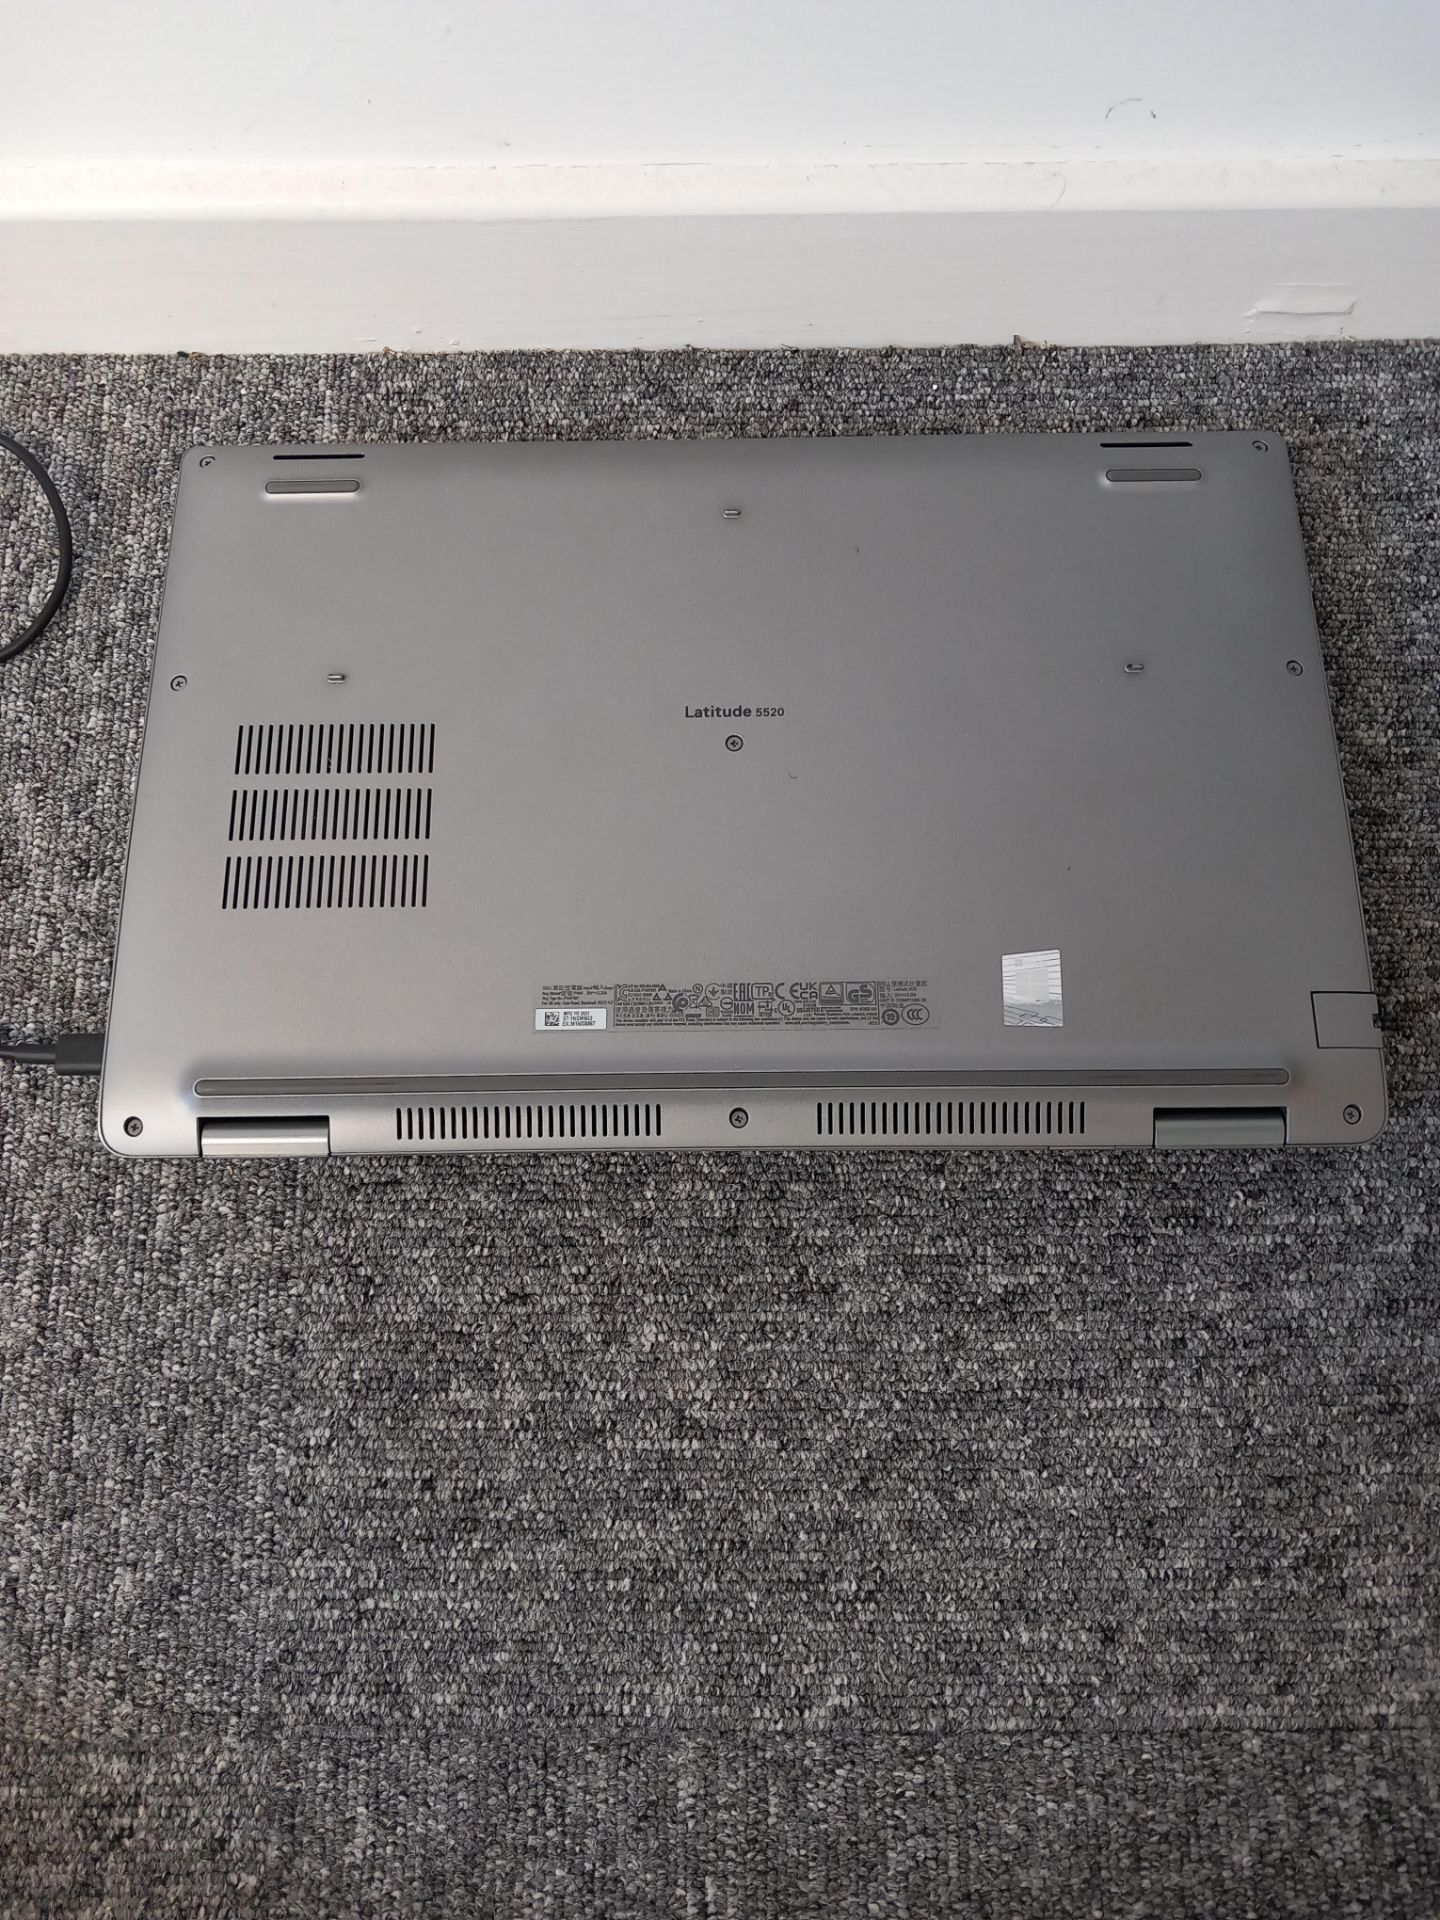 Dell Latitude 5520 Laptop no charger (Located in Stockport) - Image 3 of 6